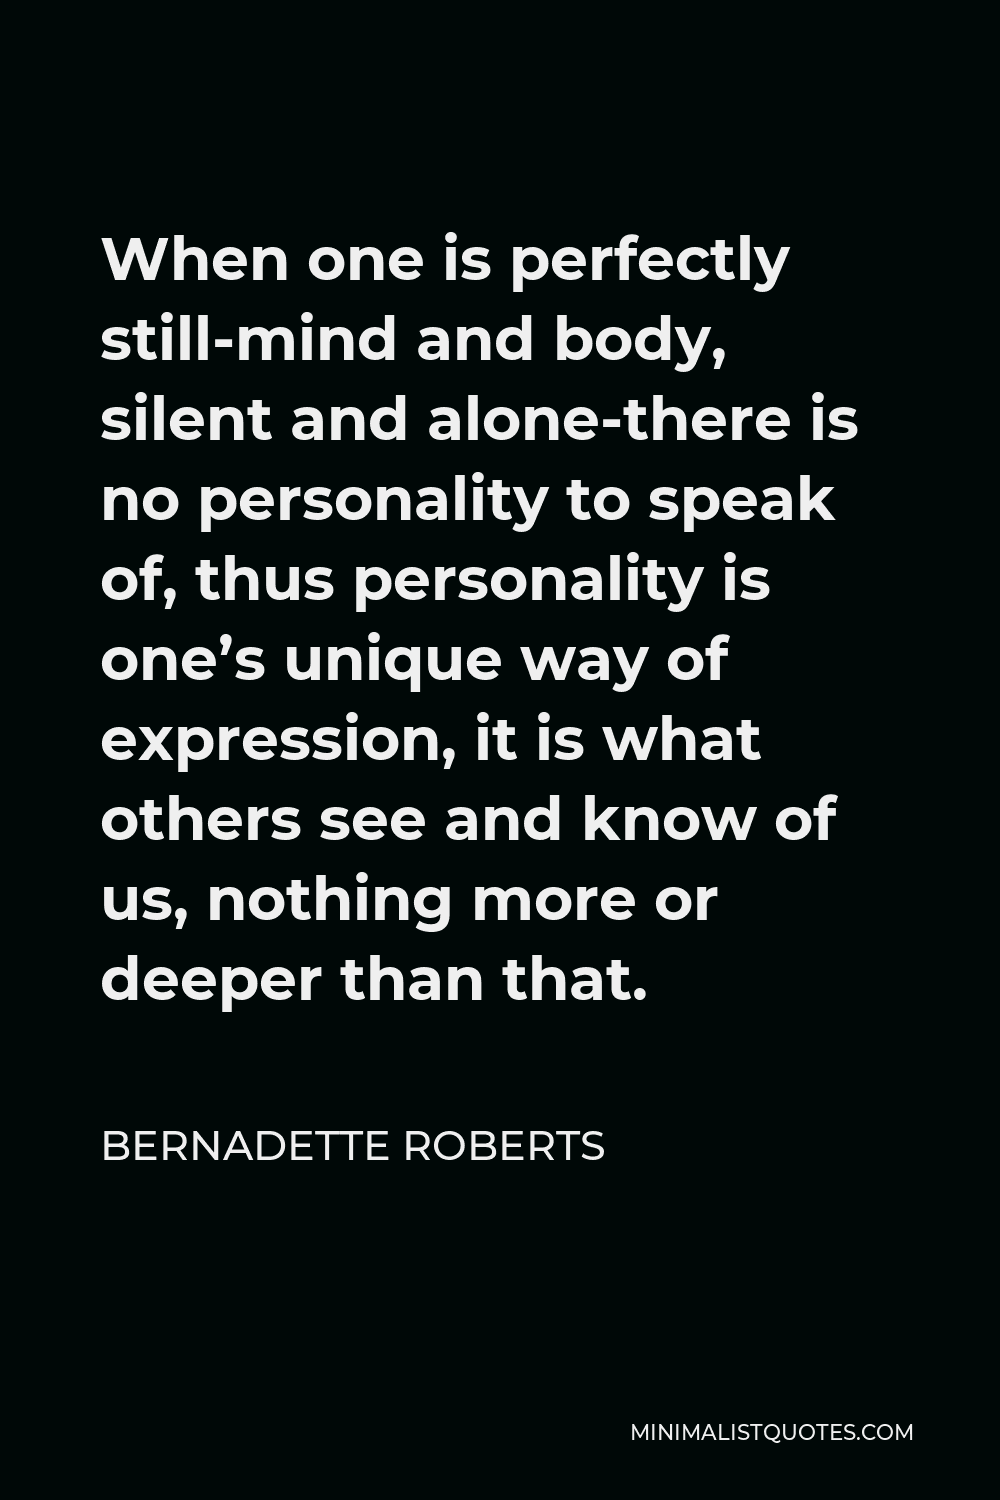 Bernadette Roberts Quote - When one is perfectly still-mind and body, silent and alone-there is no personality to speak of, thus personality is one’s unique way of expression, it is what others see and know of us, nothing more or deeper than that.